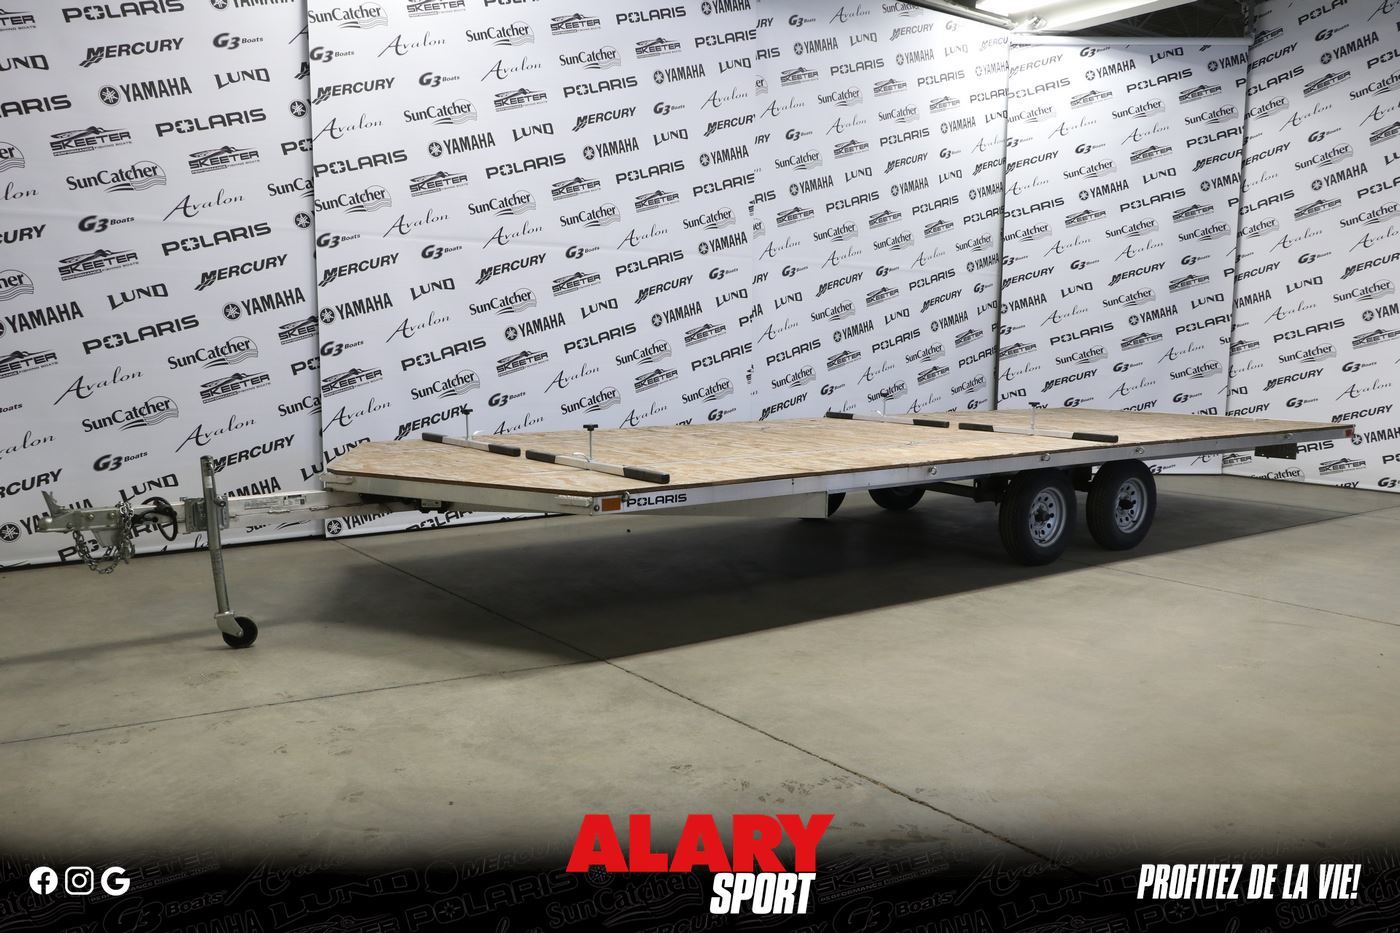 Alary Sport | Trailers Polaris in our Complete inventory in Saint